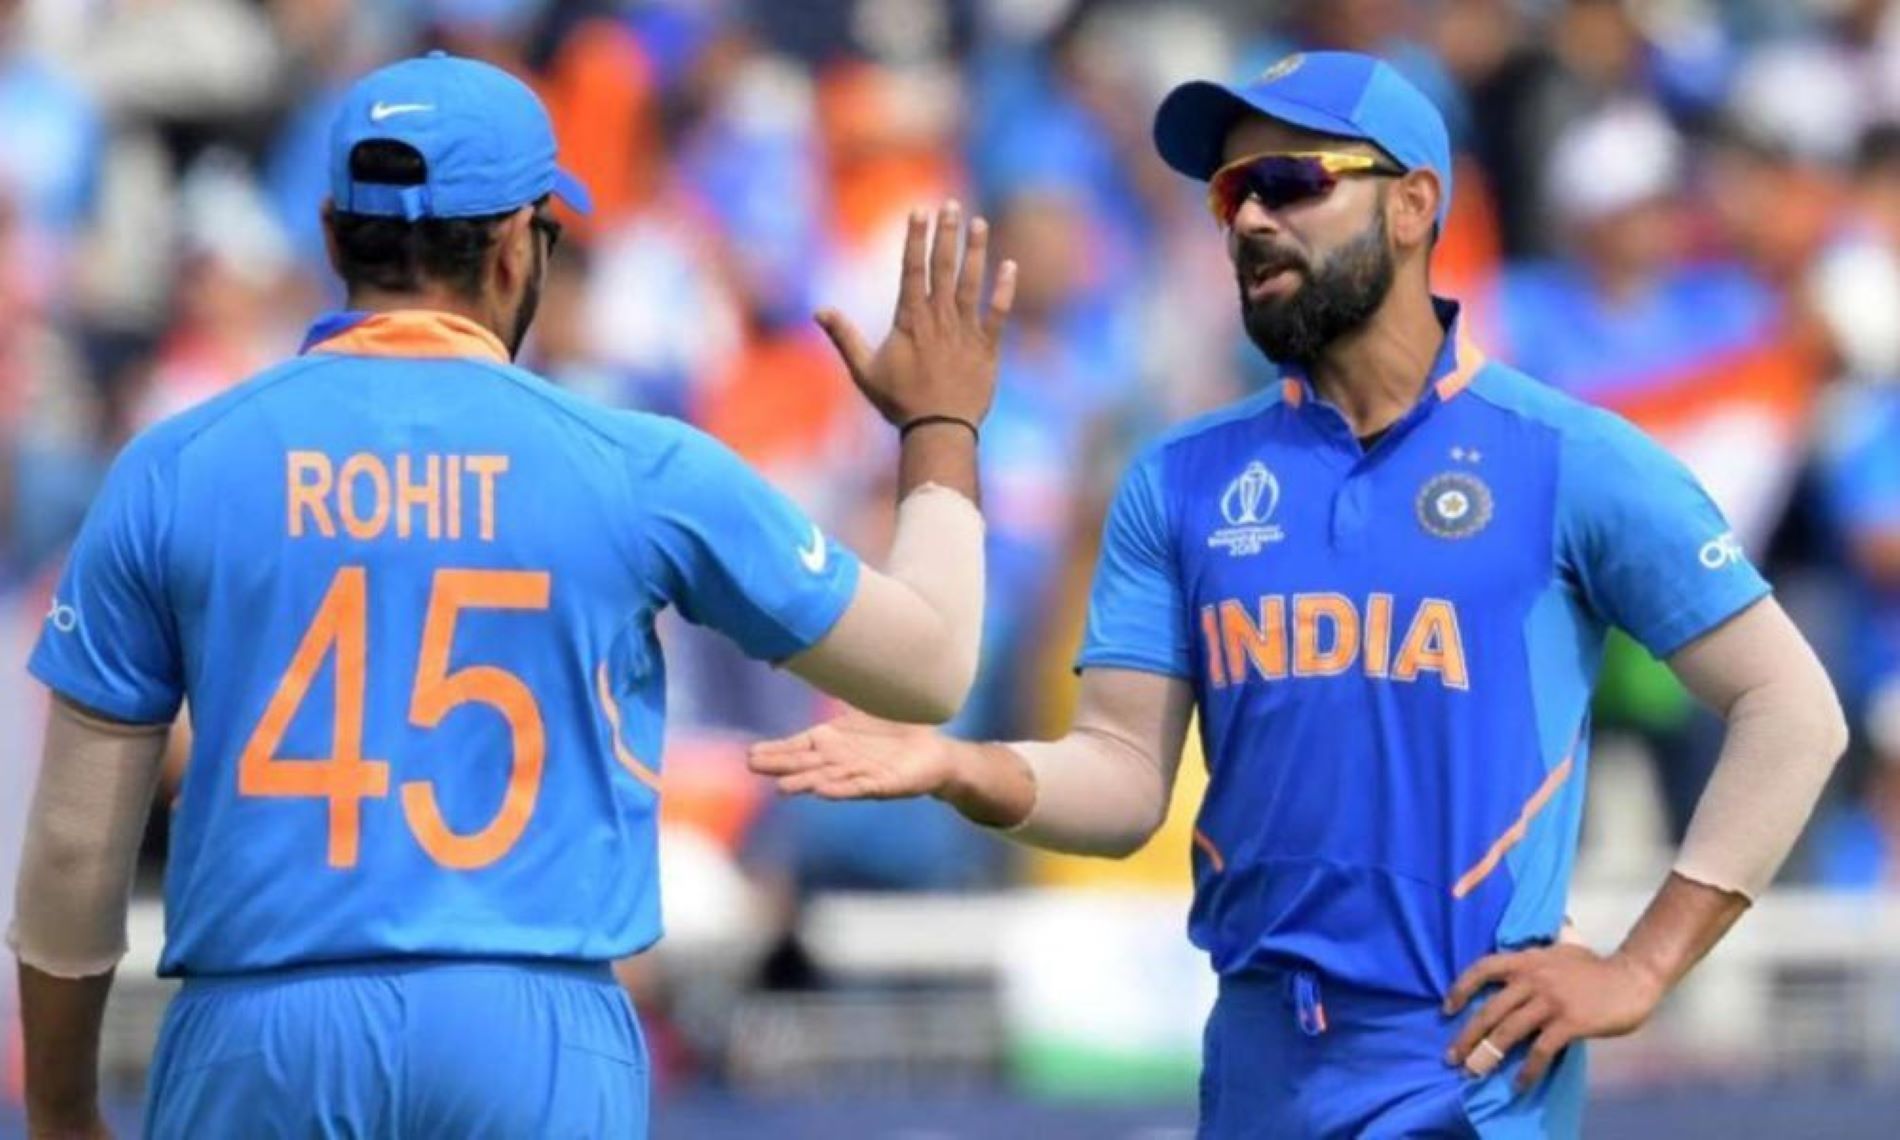 Kohli and Rohit were rested for the final two ODIs against the West Indies